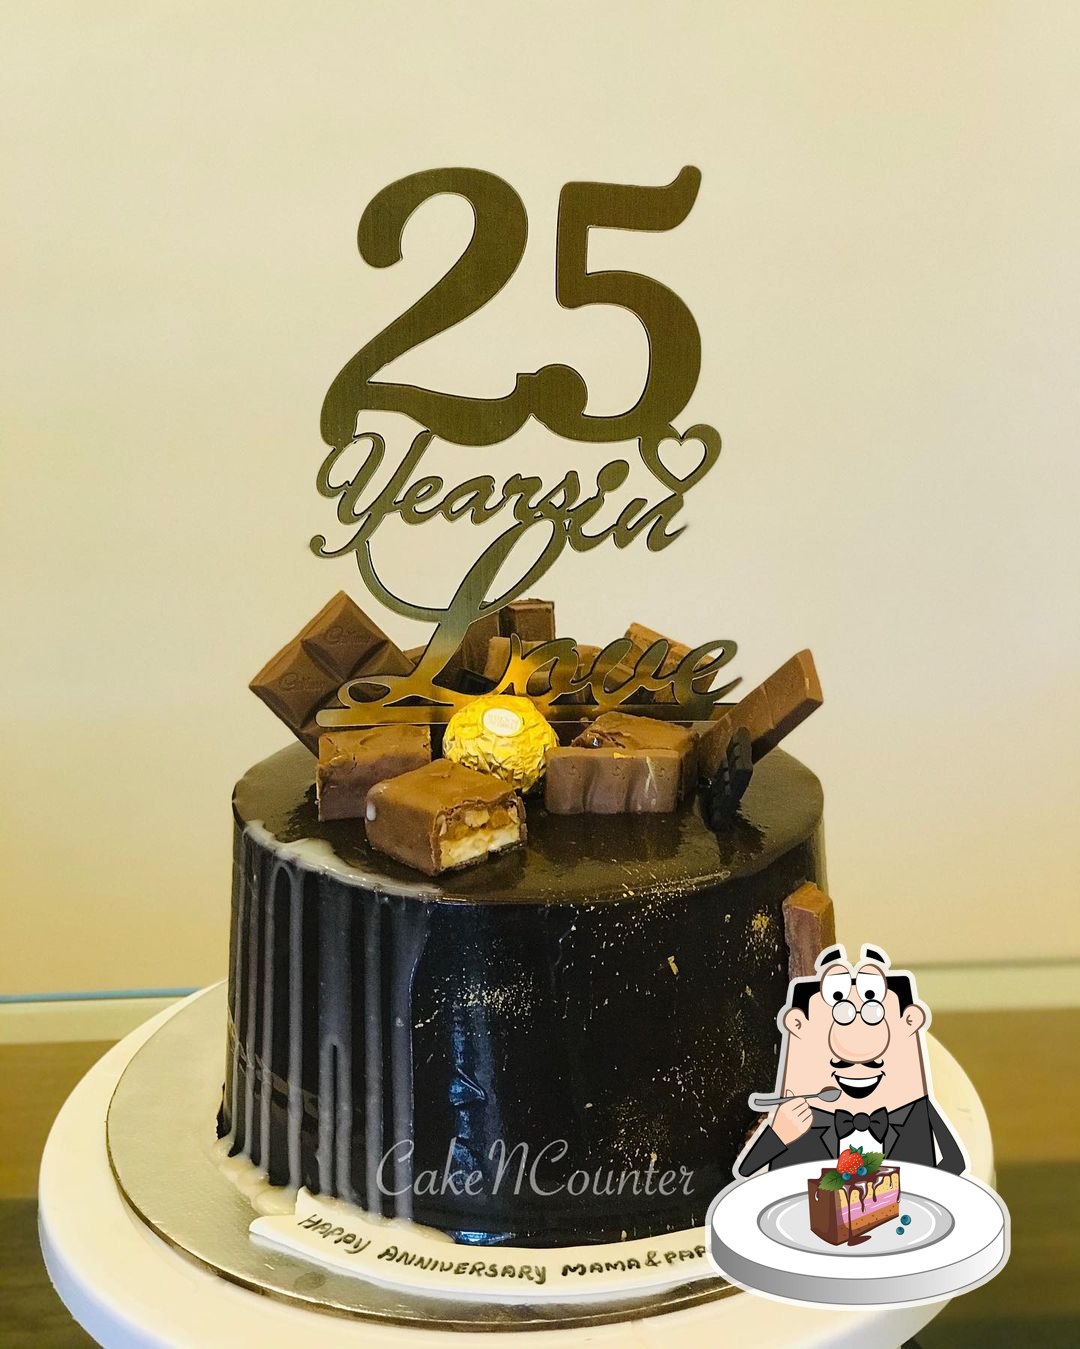 Cake N Counter Photos, Camp, Pune- Pictures & Images Gallery - Justdial